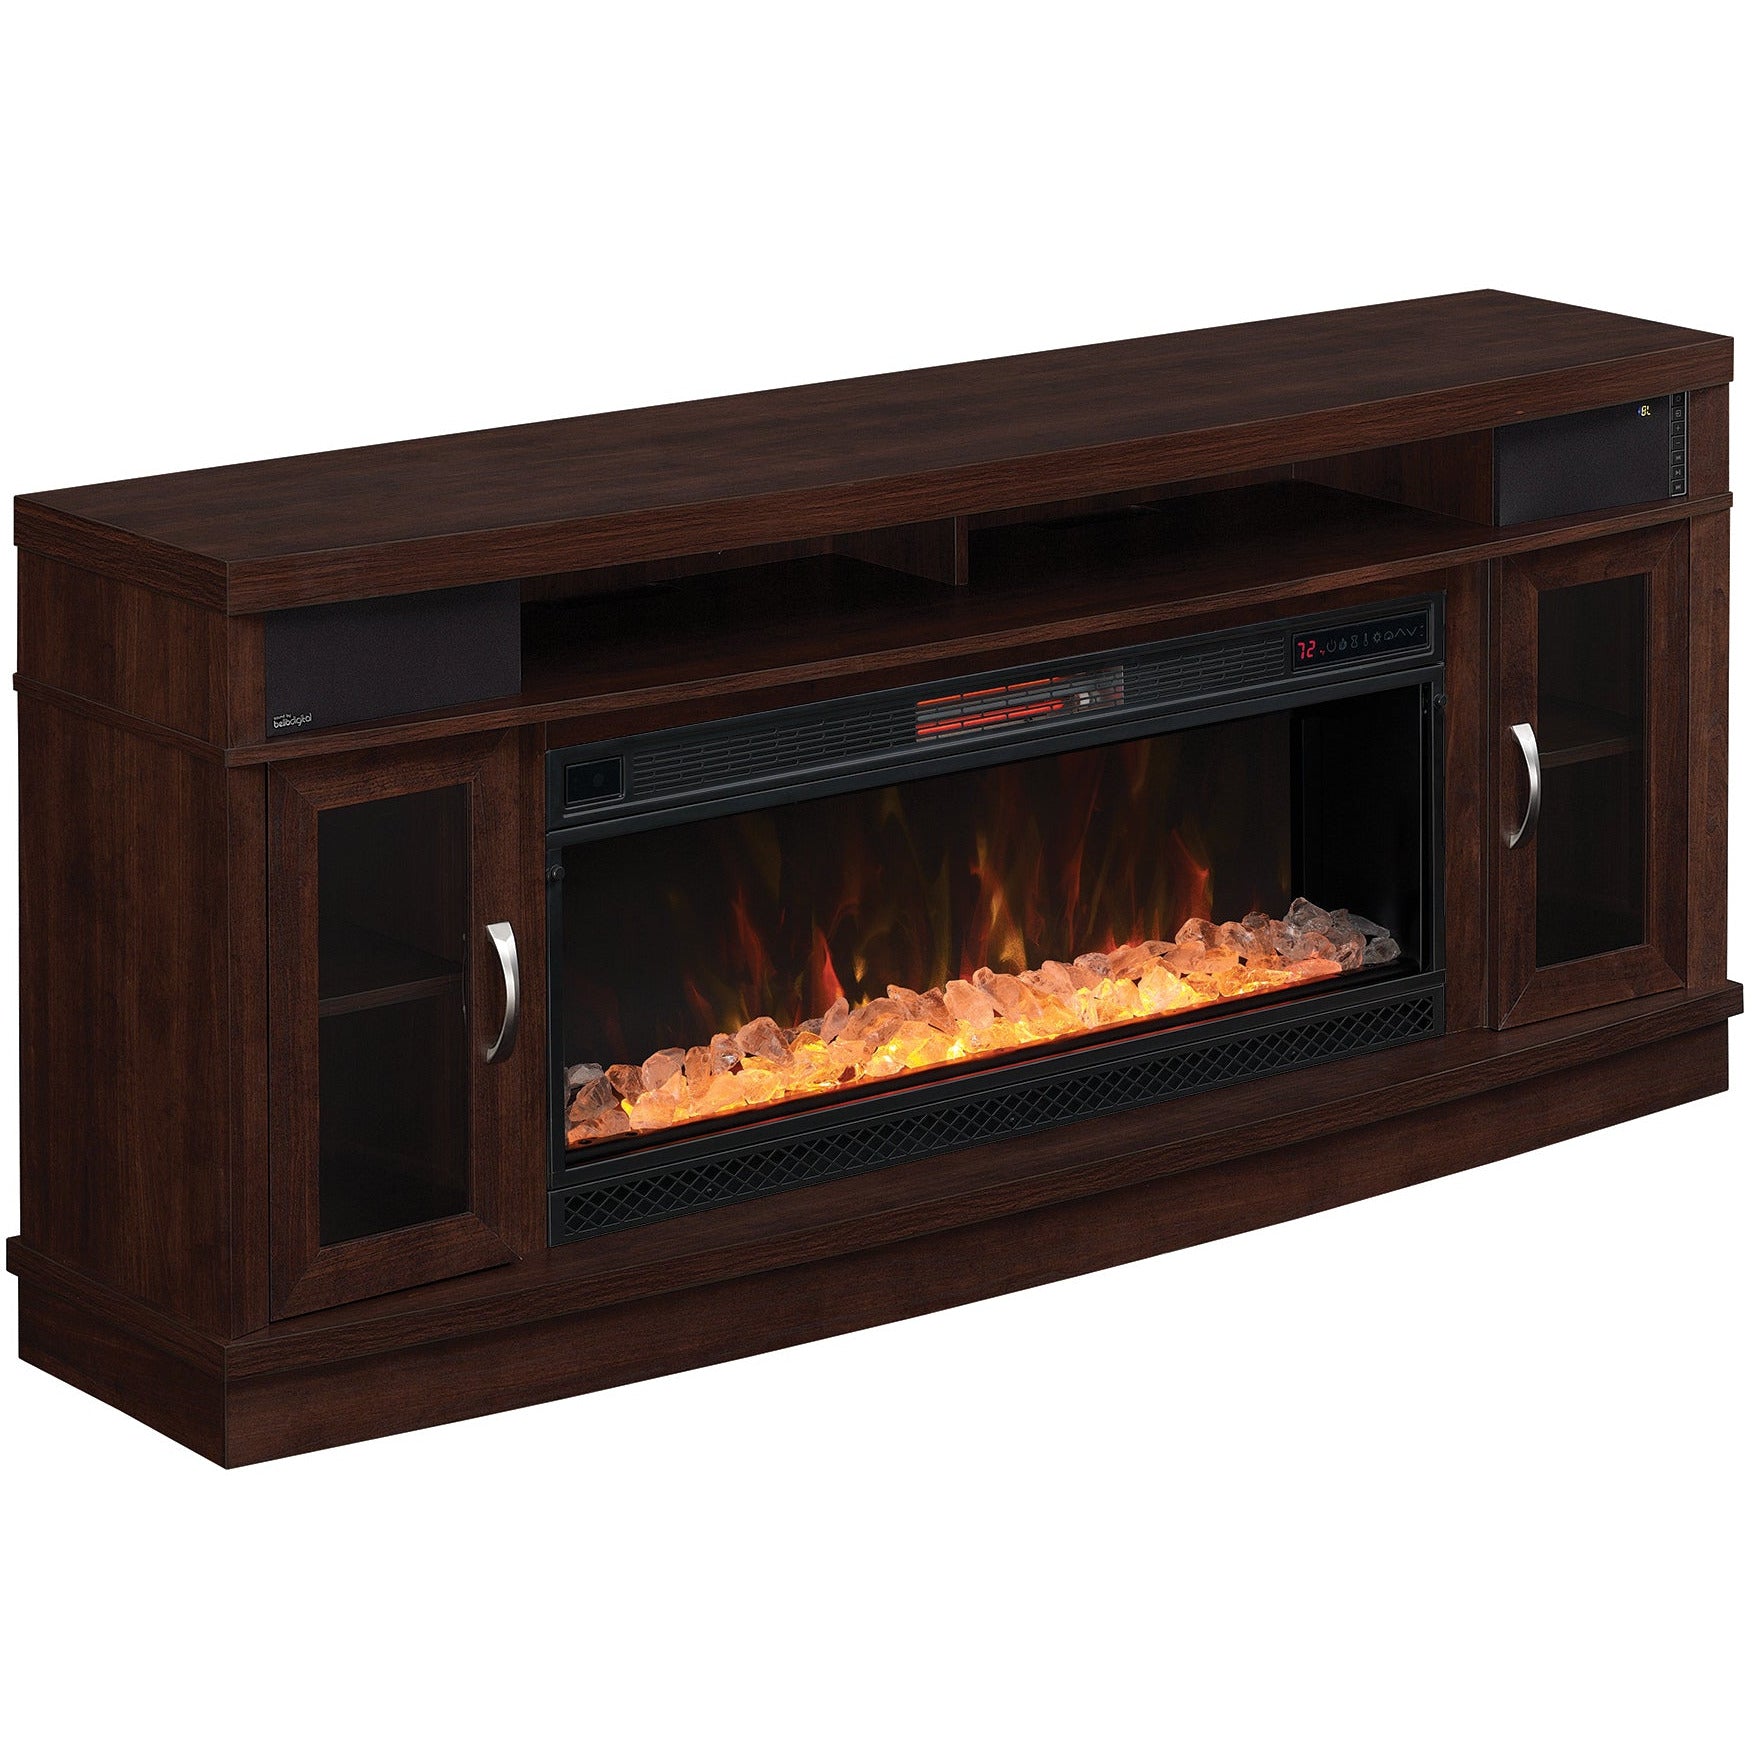 Deerfield Media and Sound Fireplace